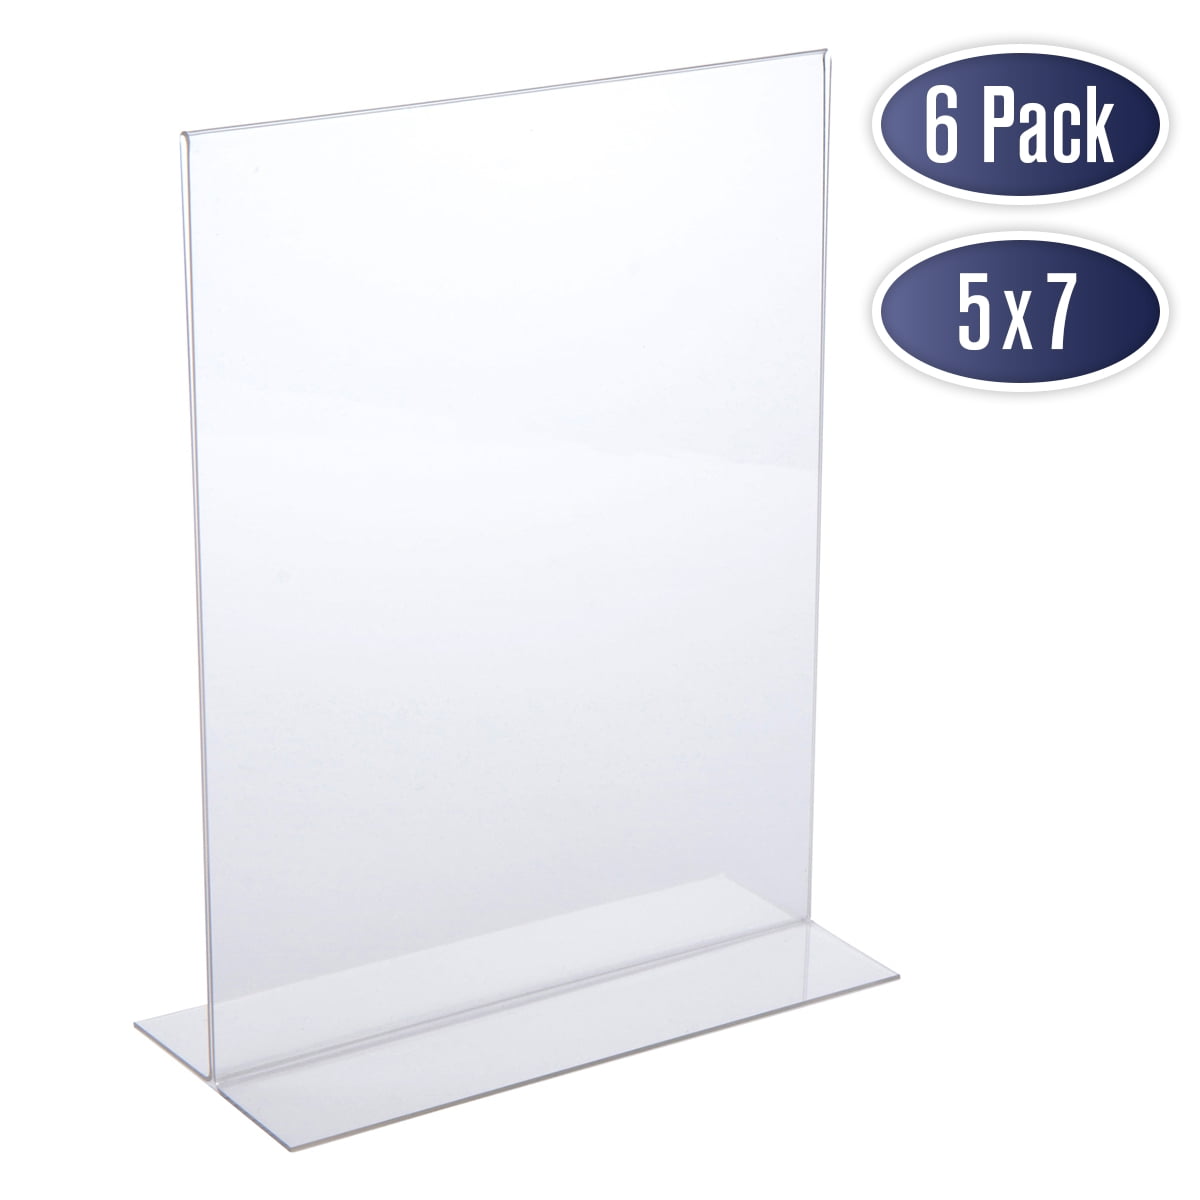 Acrylic Clear Transparent Photo Frame Display Stand Table Desktop Decor Holder